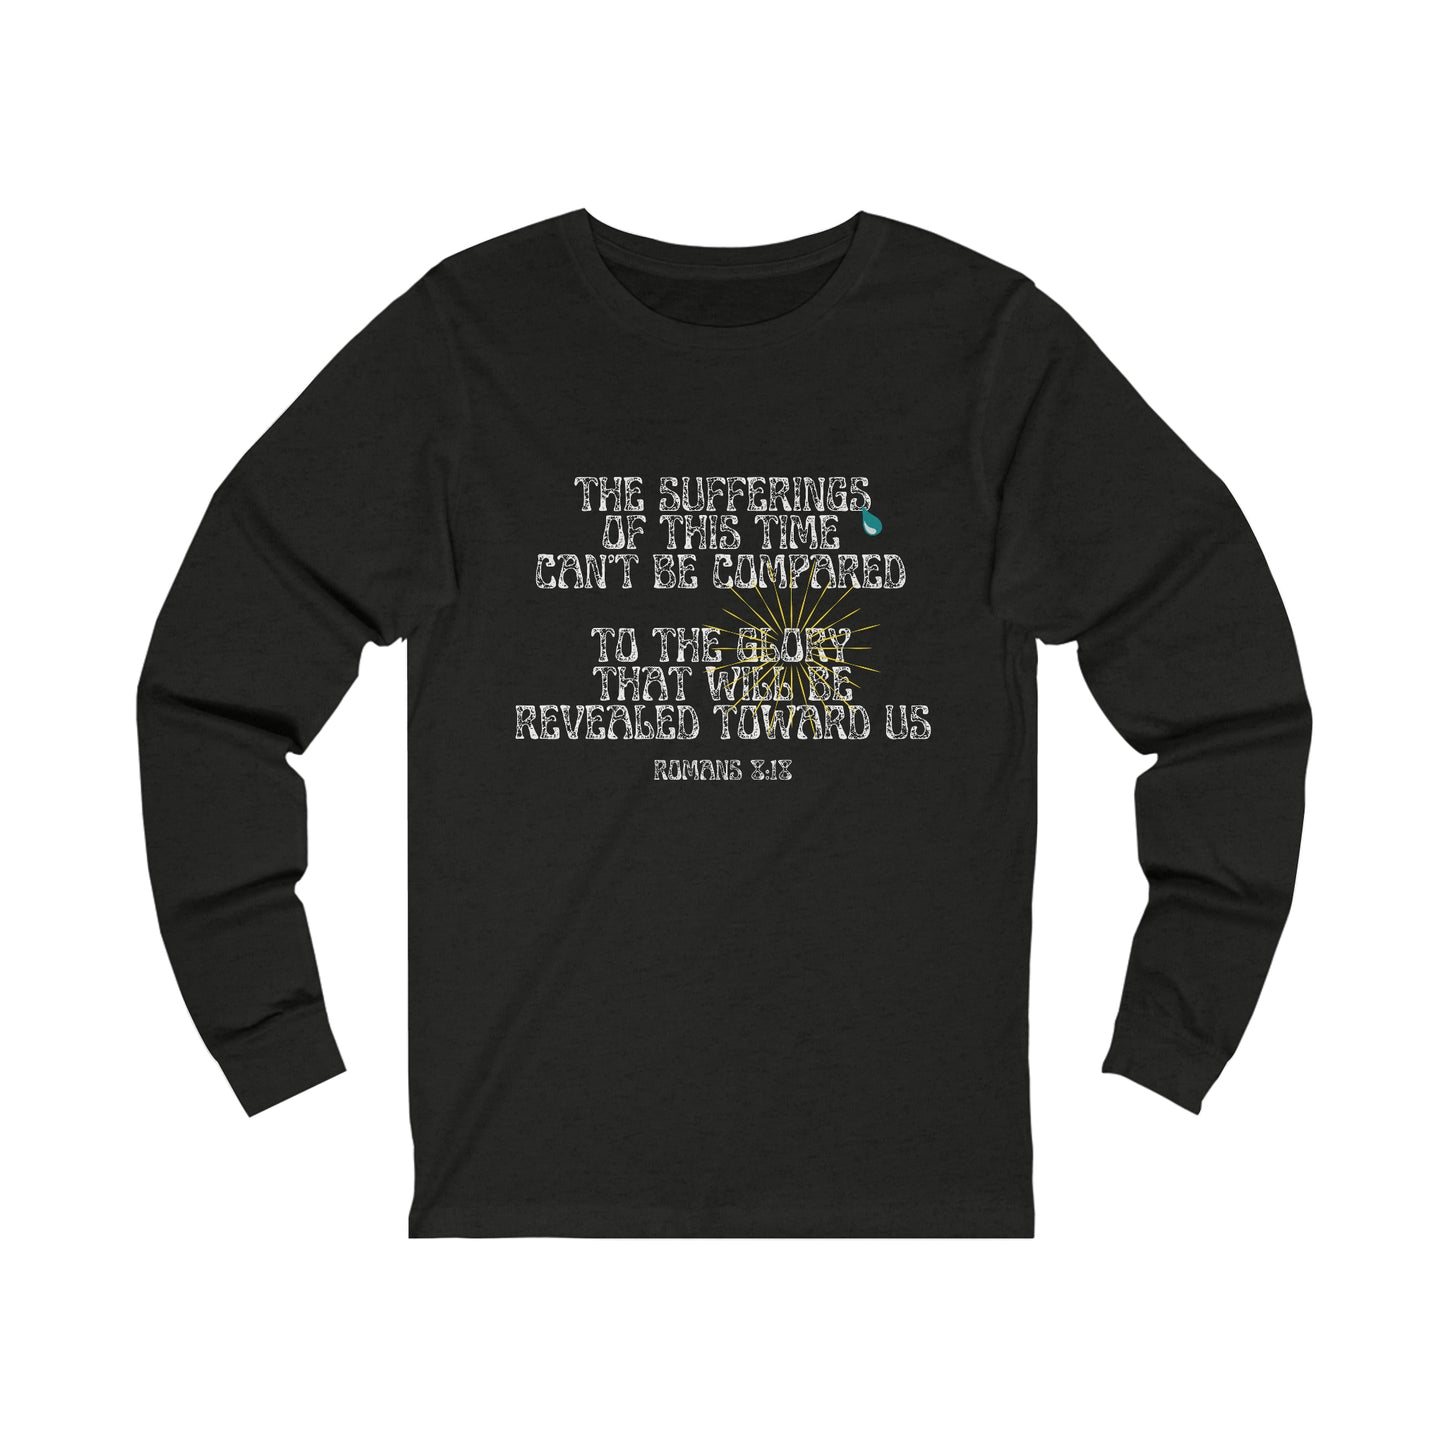 The Sufferings of This Present Time Unisex Jersey Long Sleeve Tee